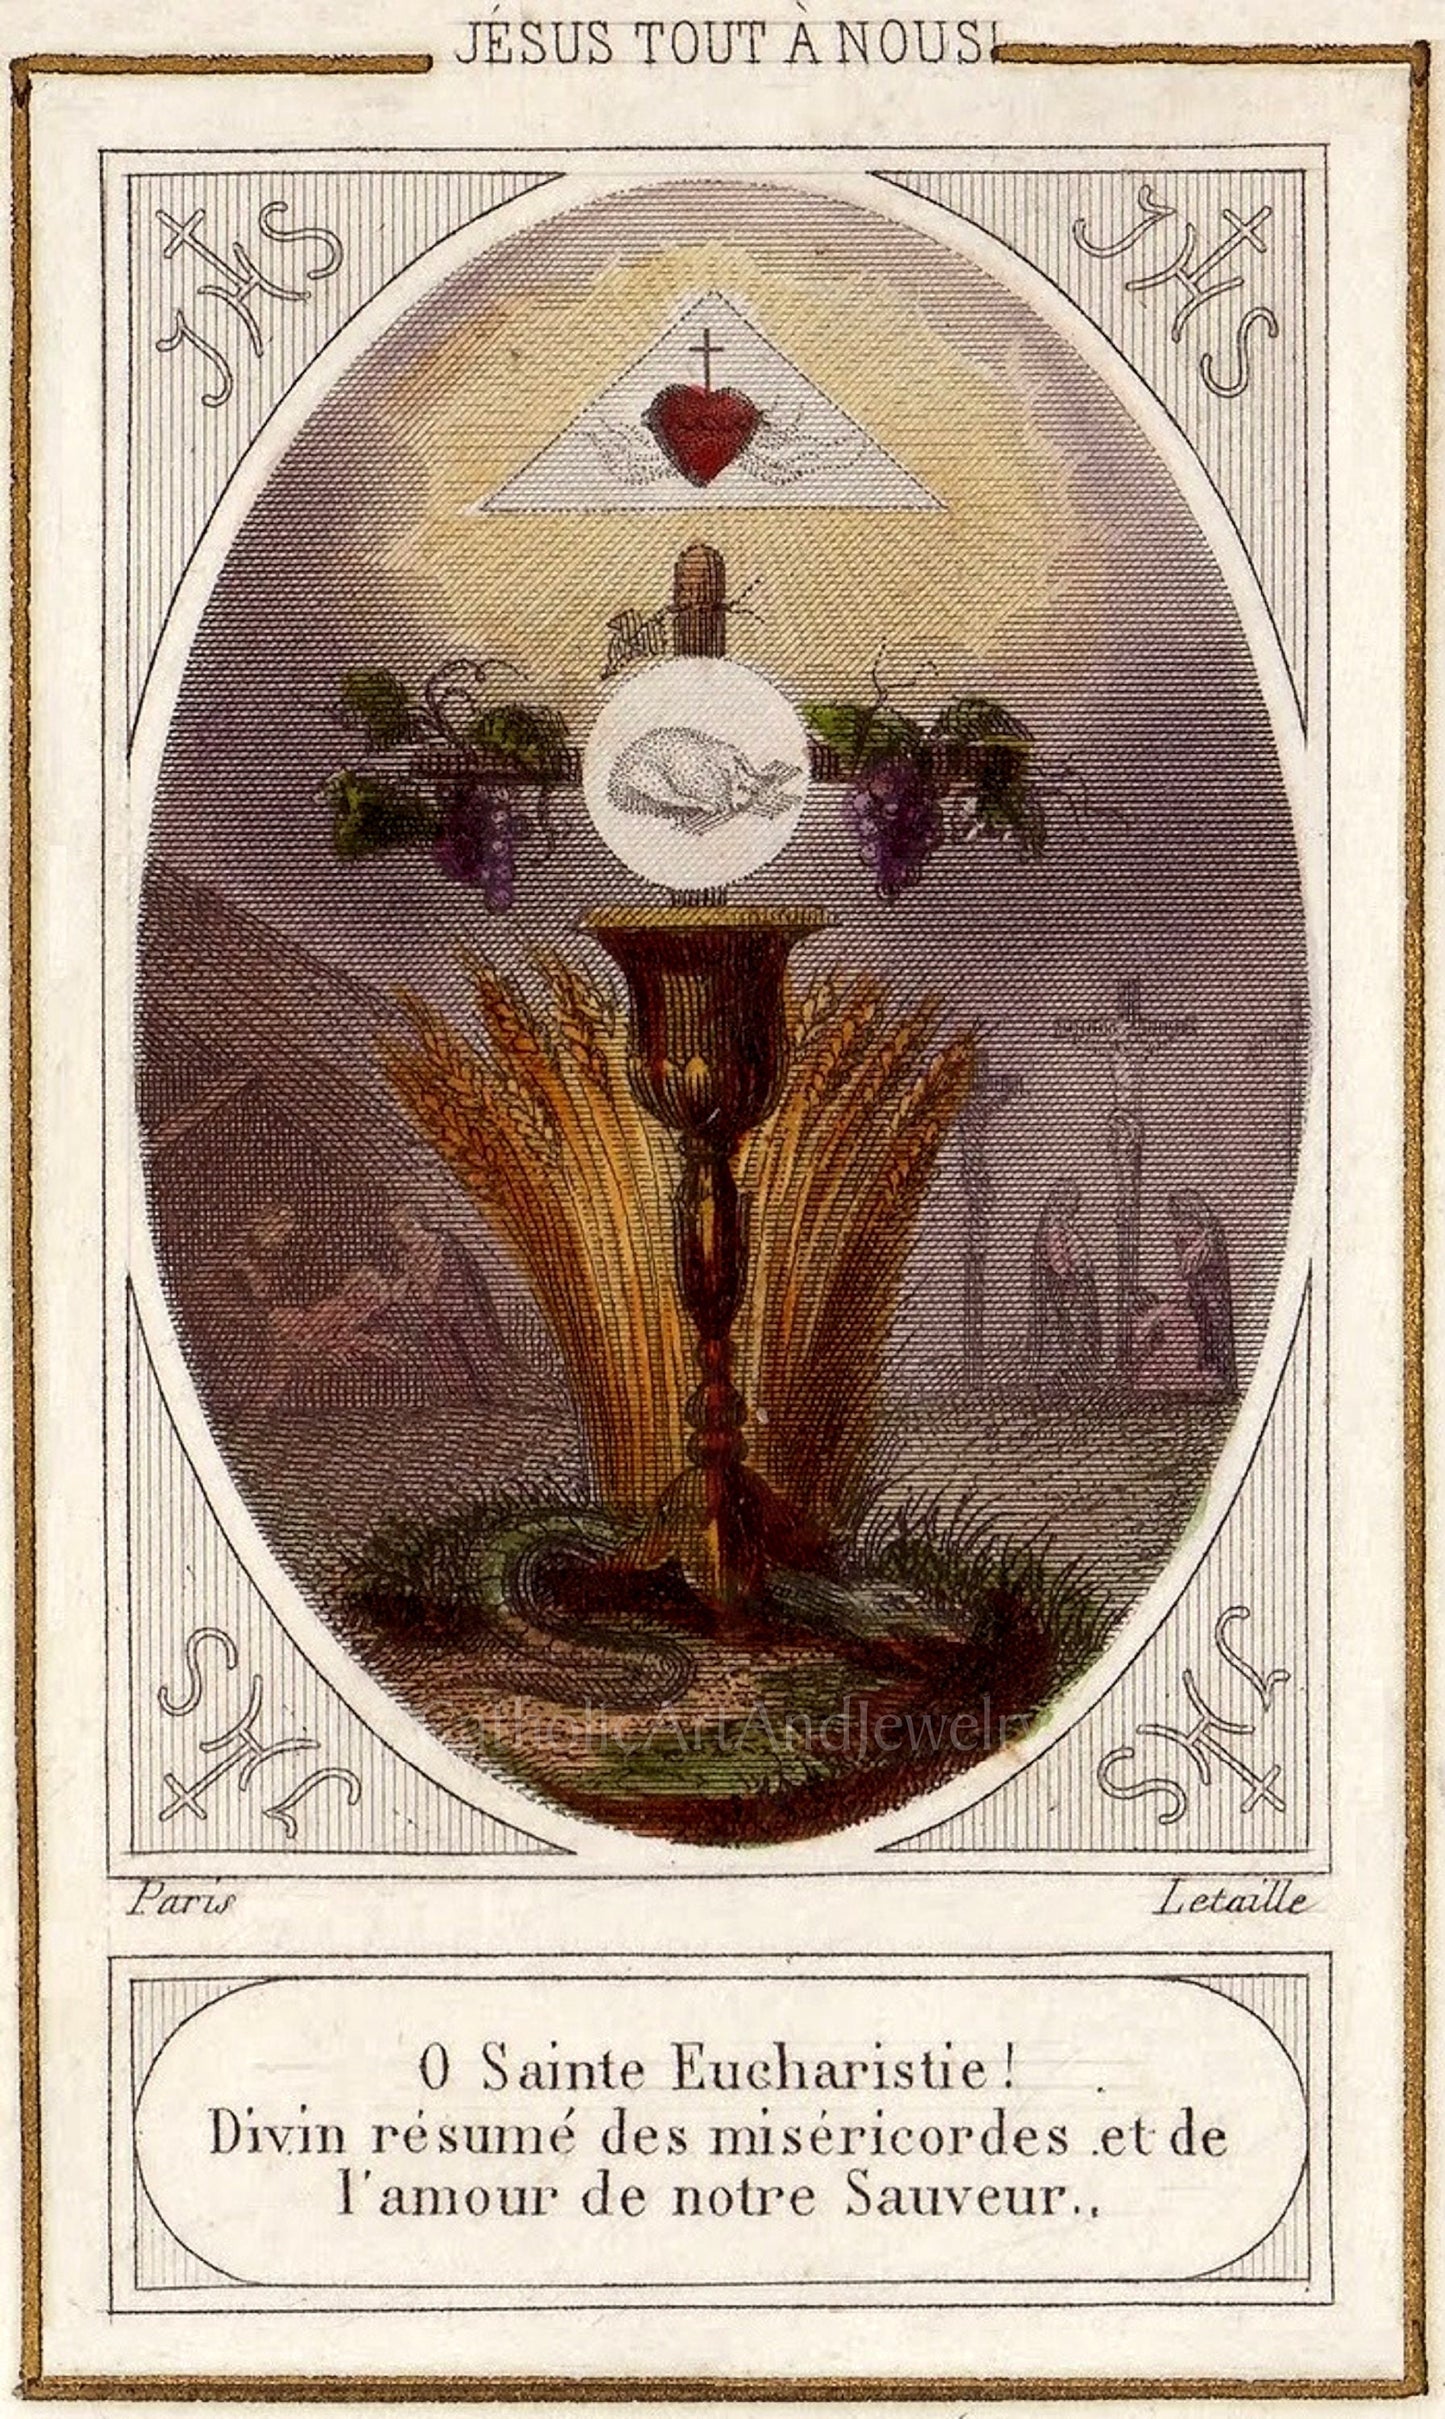 O Holy Eucharist! –8.5x11" – Based on Vintage Holy Card – Unique First Communion Gift – PERSONALIZED – Archival Quality